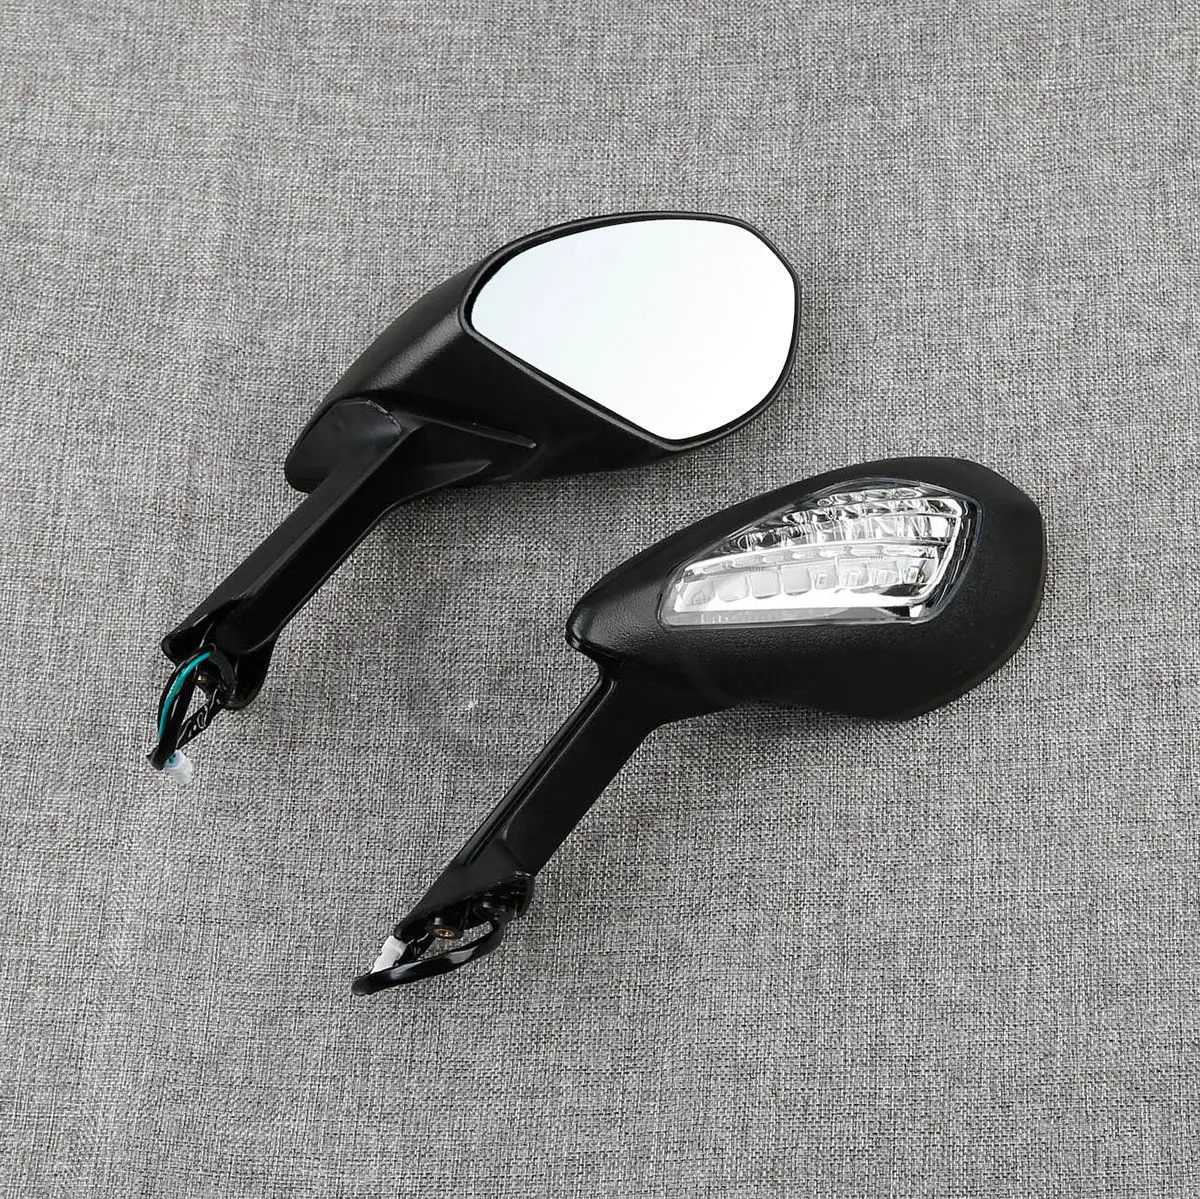 L&R Side Black Mirrors Set W/ Turn Signals Fit For Ducati 959 S Panigale 2016 US